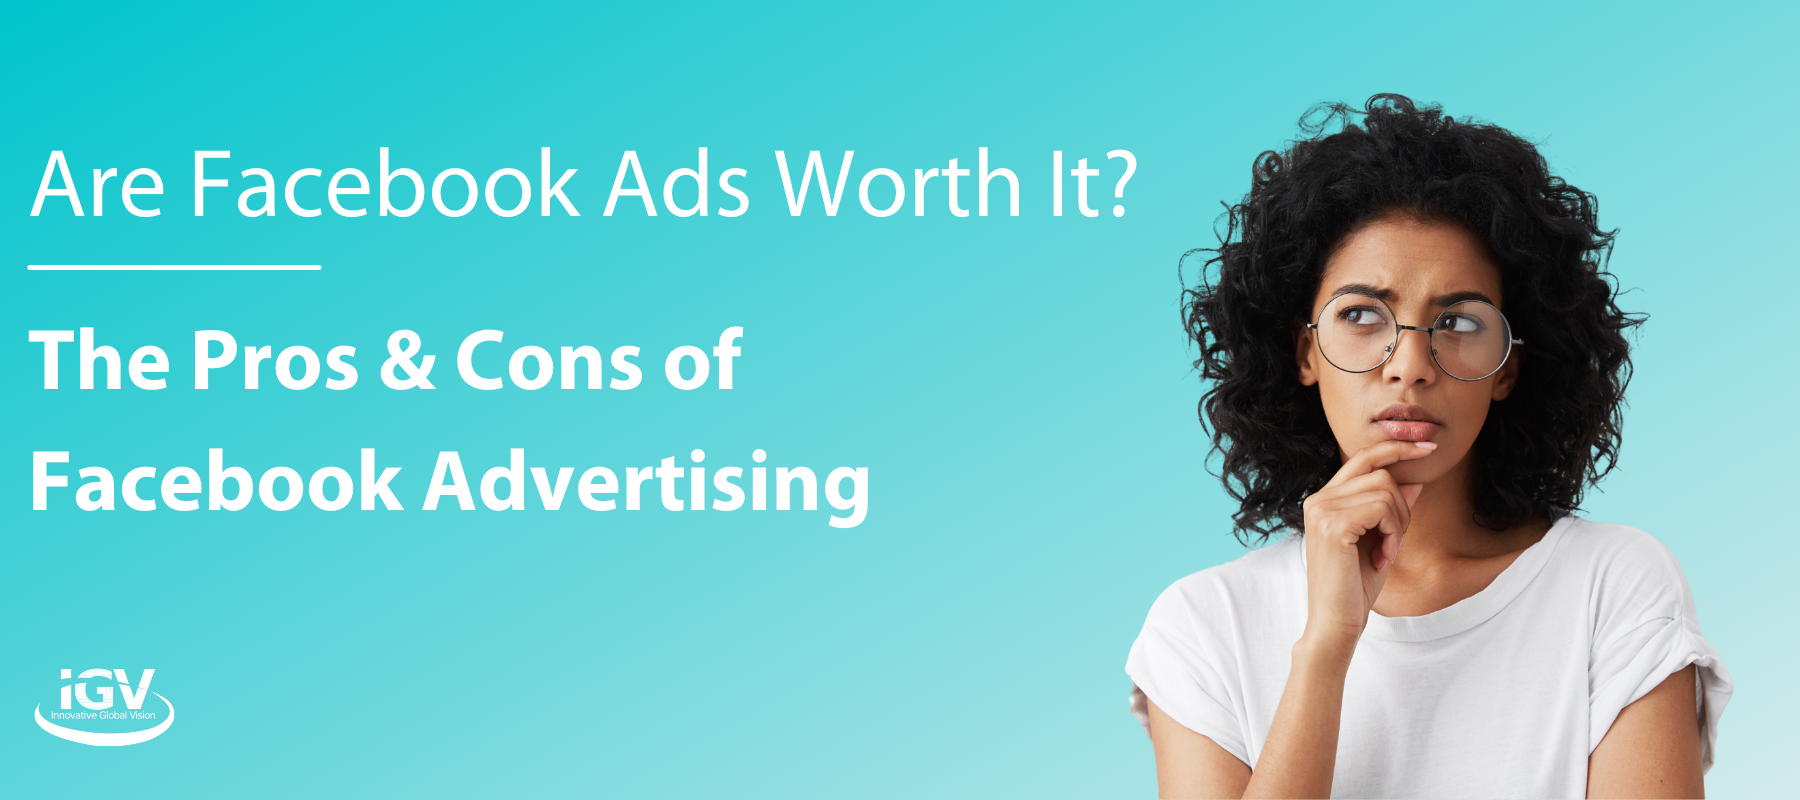 pros and cons of facebook advertising